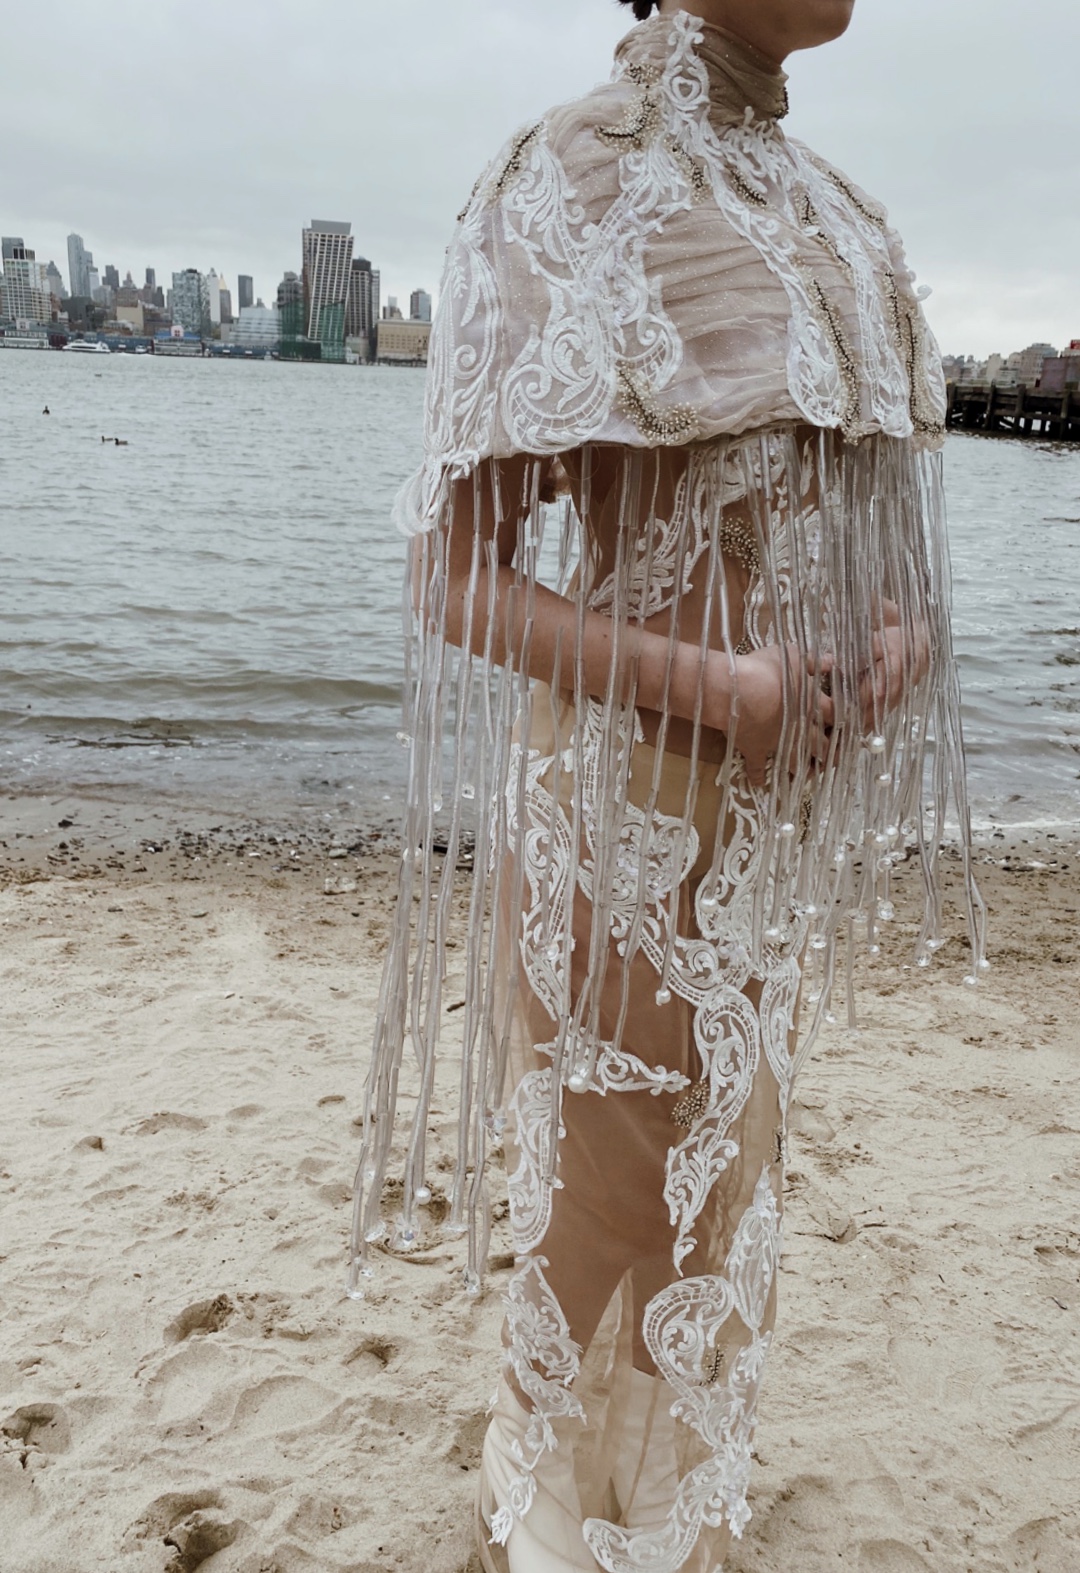 The garment is inspired by ocean pollution. Using recycled plastics and repurposed bridal fabrics, the look highlights waste in the fashion industry and beyond. The cape is modeled after a jelly fish, using beads that I created from plastic water bottles to make the tentacles. The ocean wave–inspired lace appliqués highlight the impact that waste has on our oceans and its creatures.